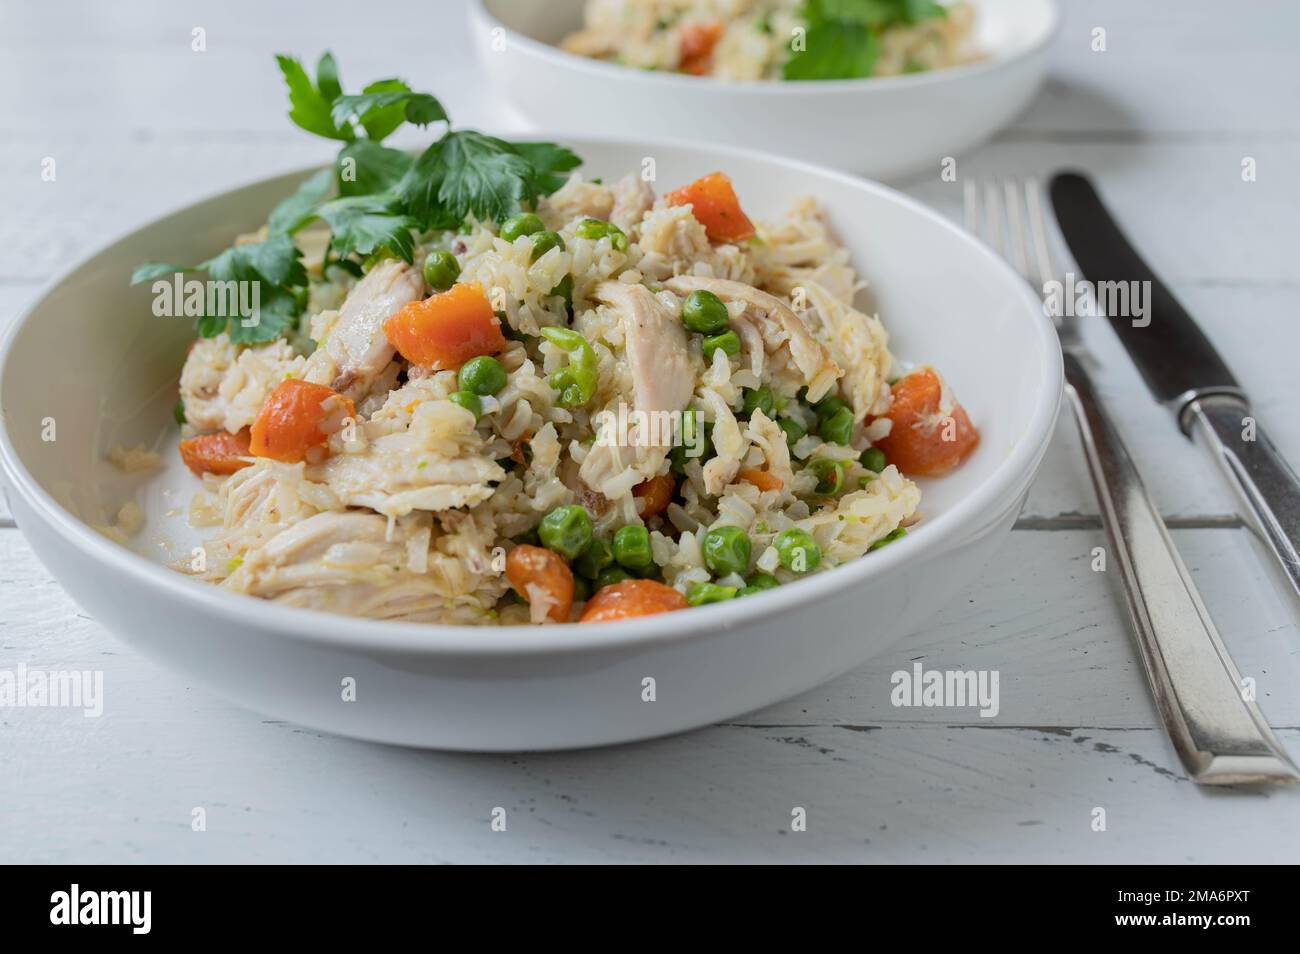 Brown rice with chicken and vegetables. on a plate with knife and fork on white background. healthy meal for fitness, diet or healthy eating Stock Photo